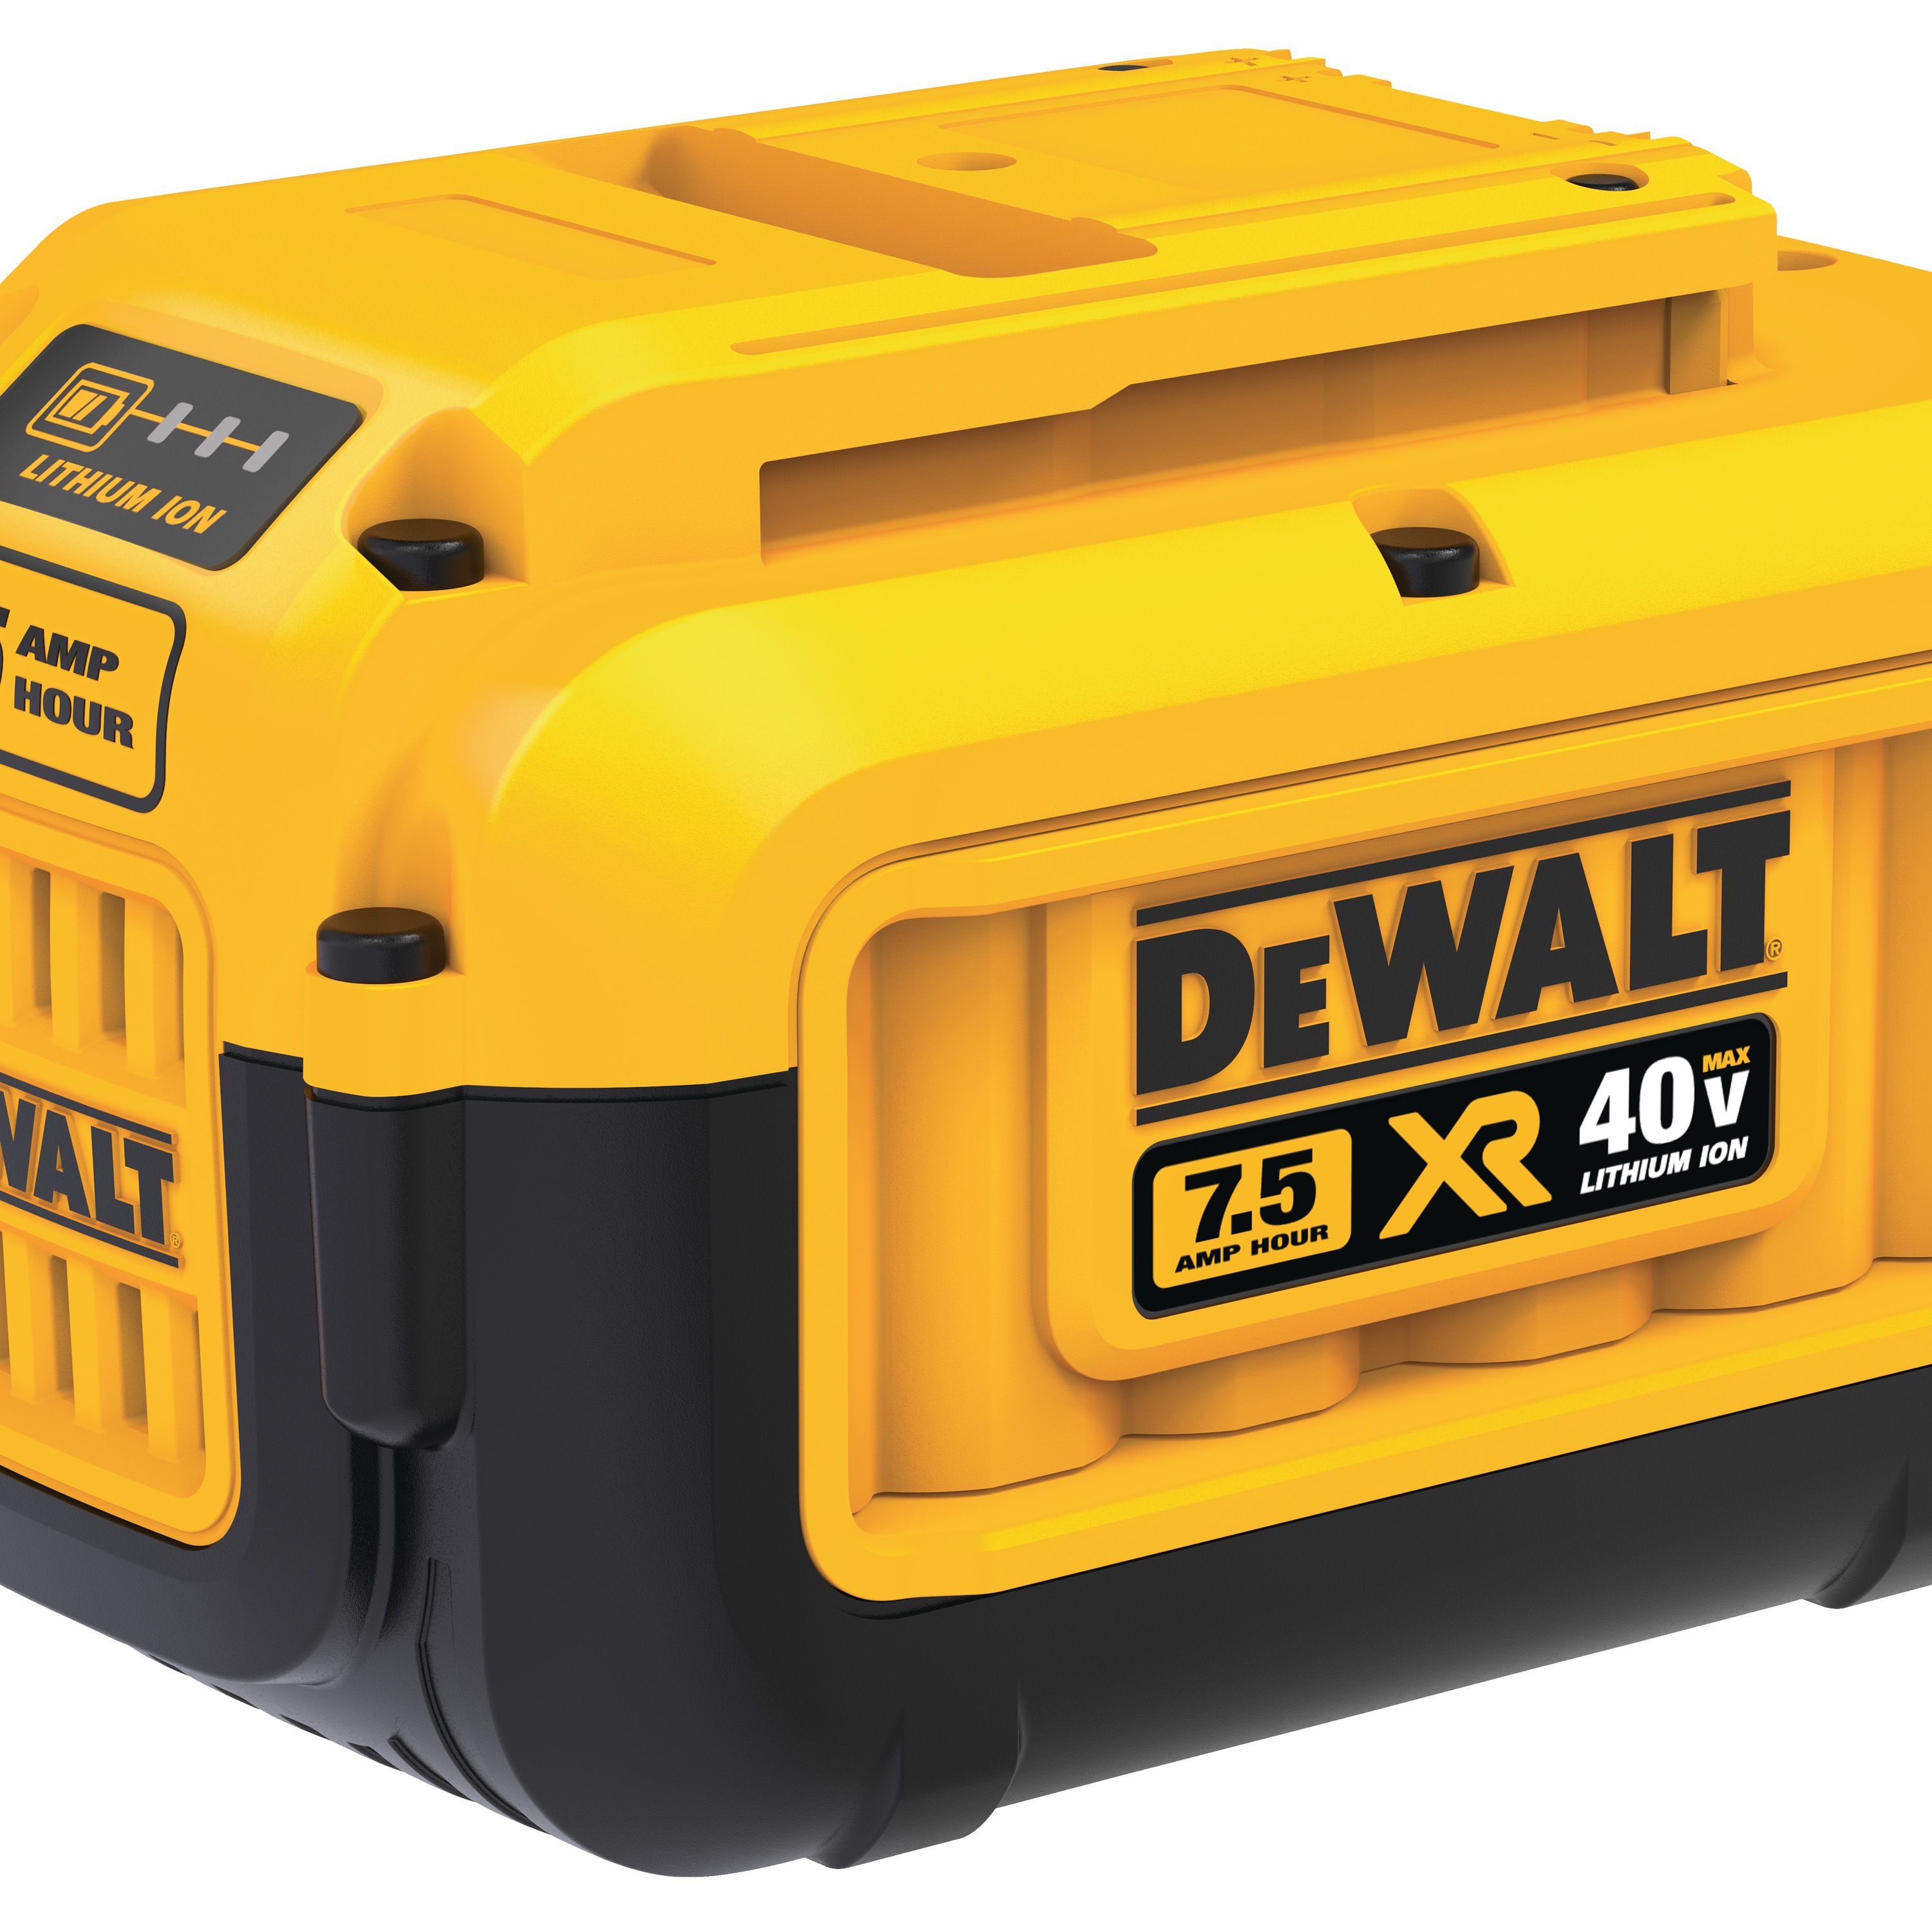 40 Volt 7.5 AMP hours Lithium-Ion Battery